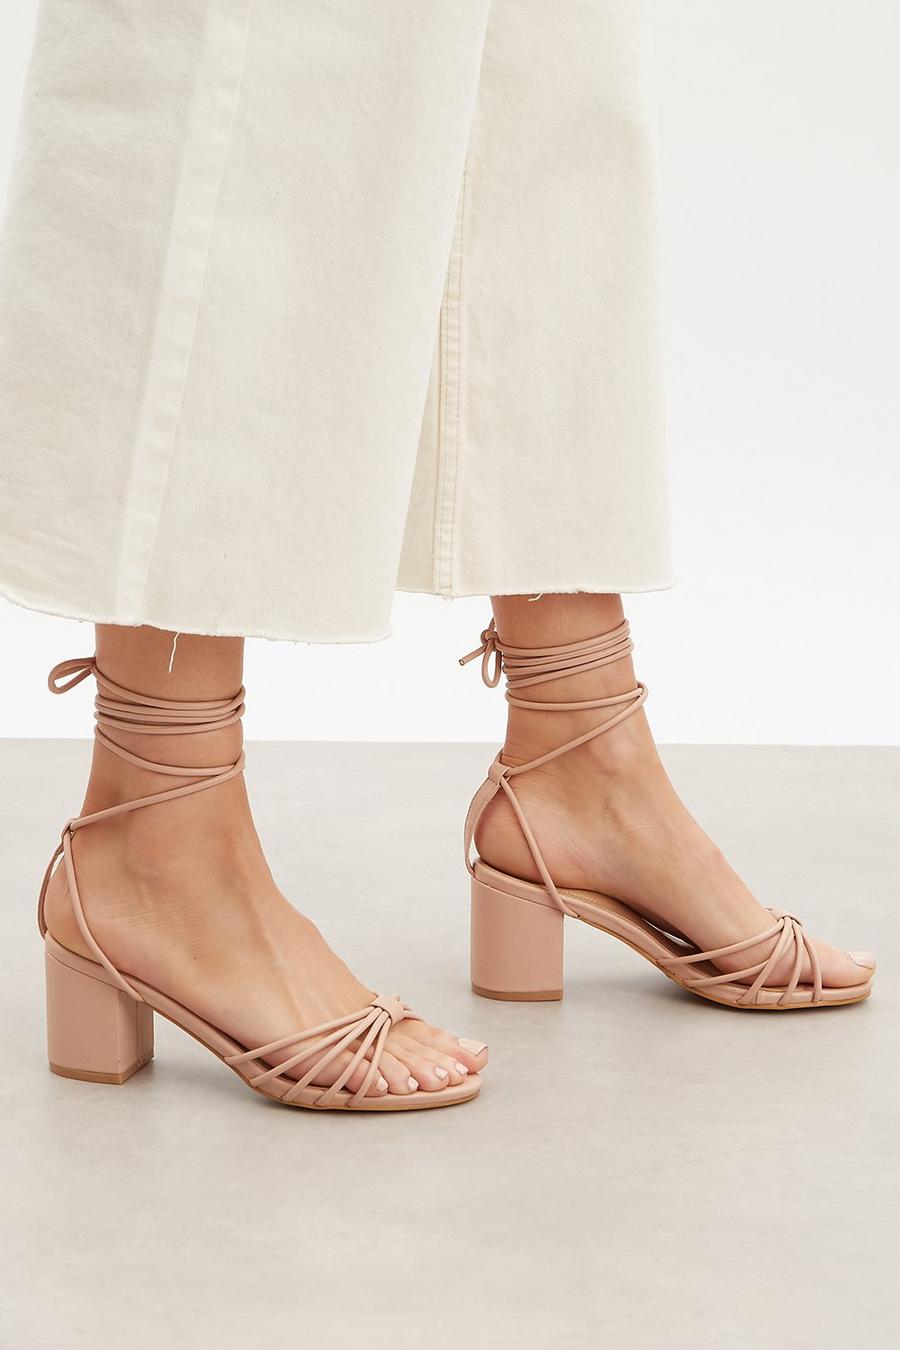 Good For The Sole: Extra Wide Comfort Sicily Comfort Heeled Sandal